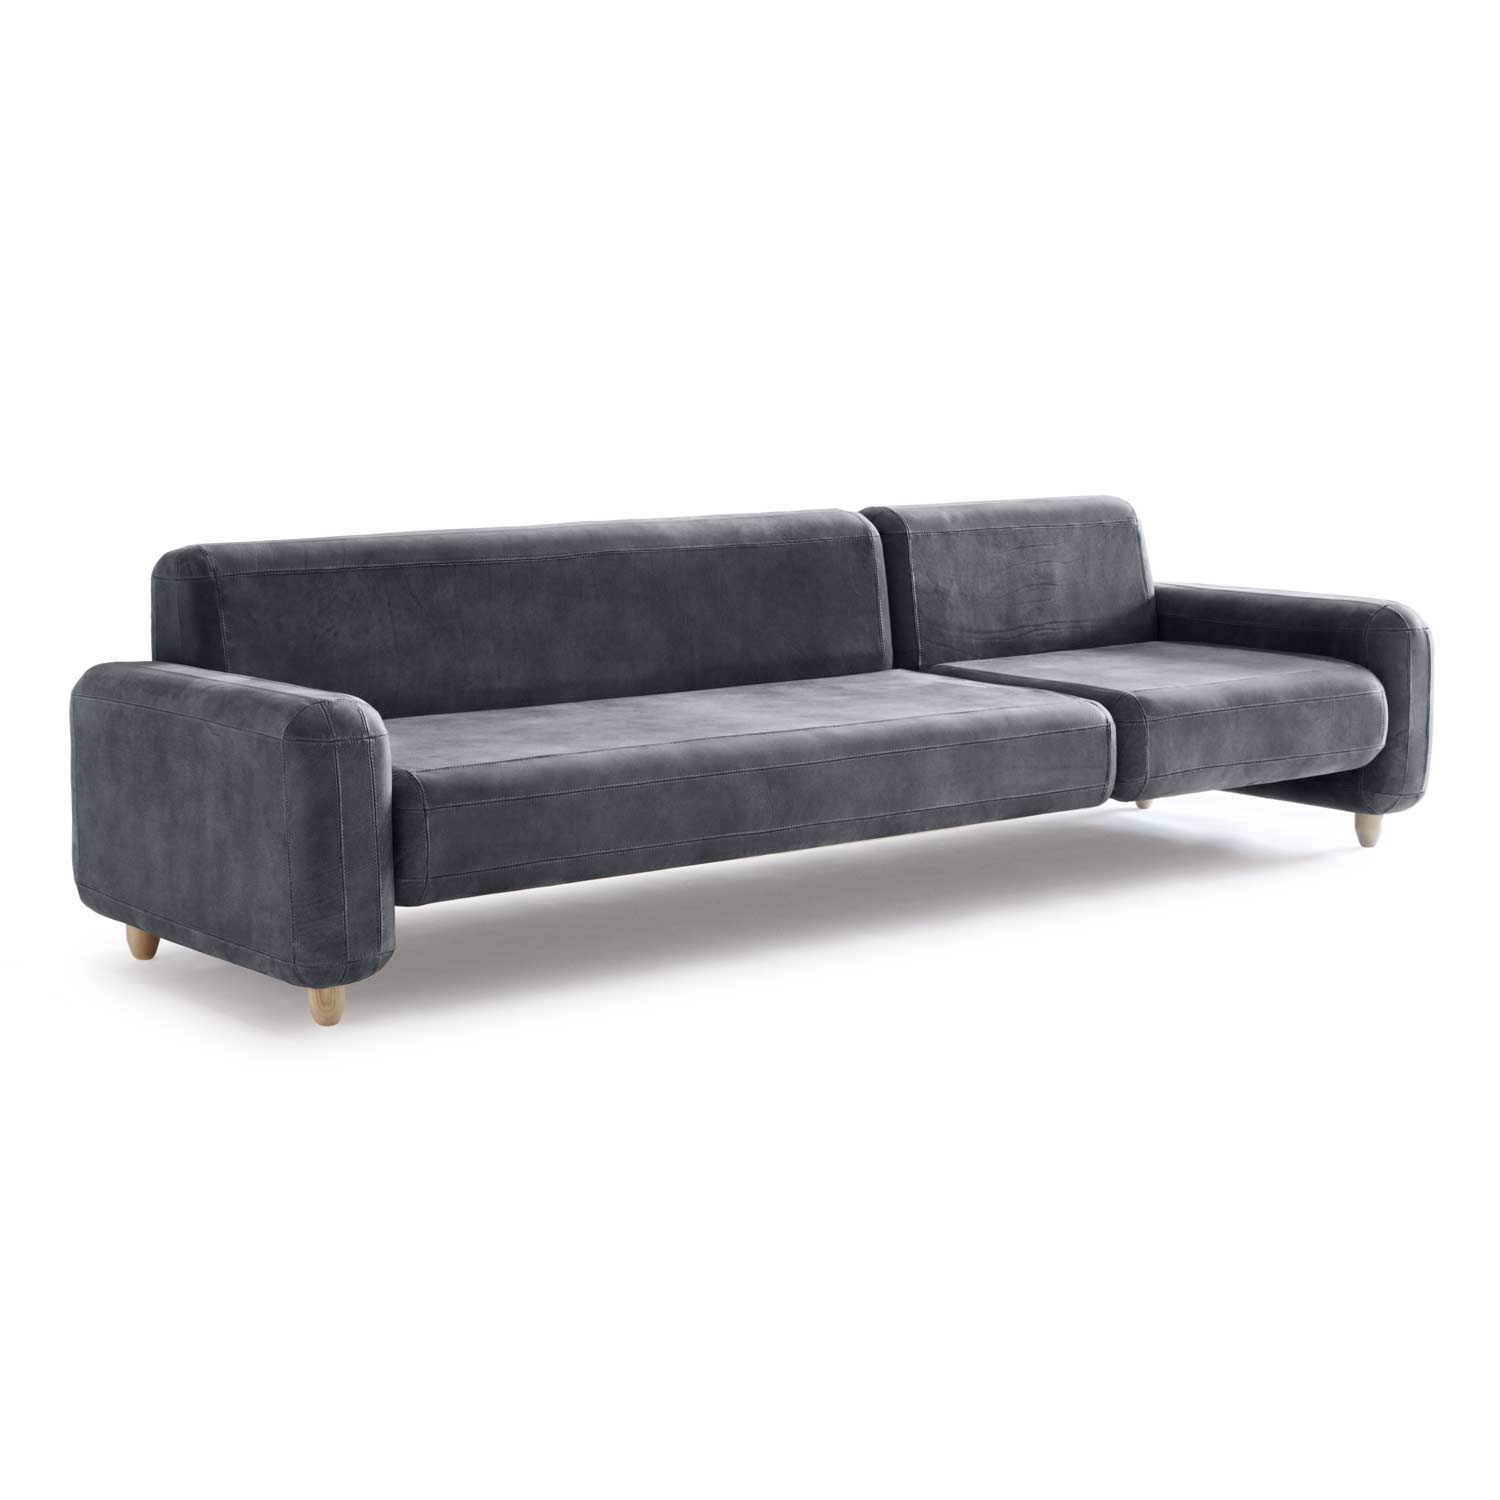 Handcrafted Comfort with Traco, grey leather sofa